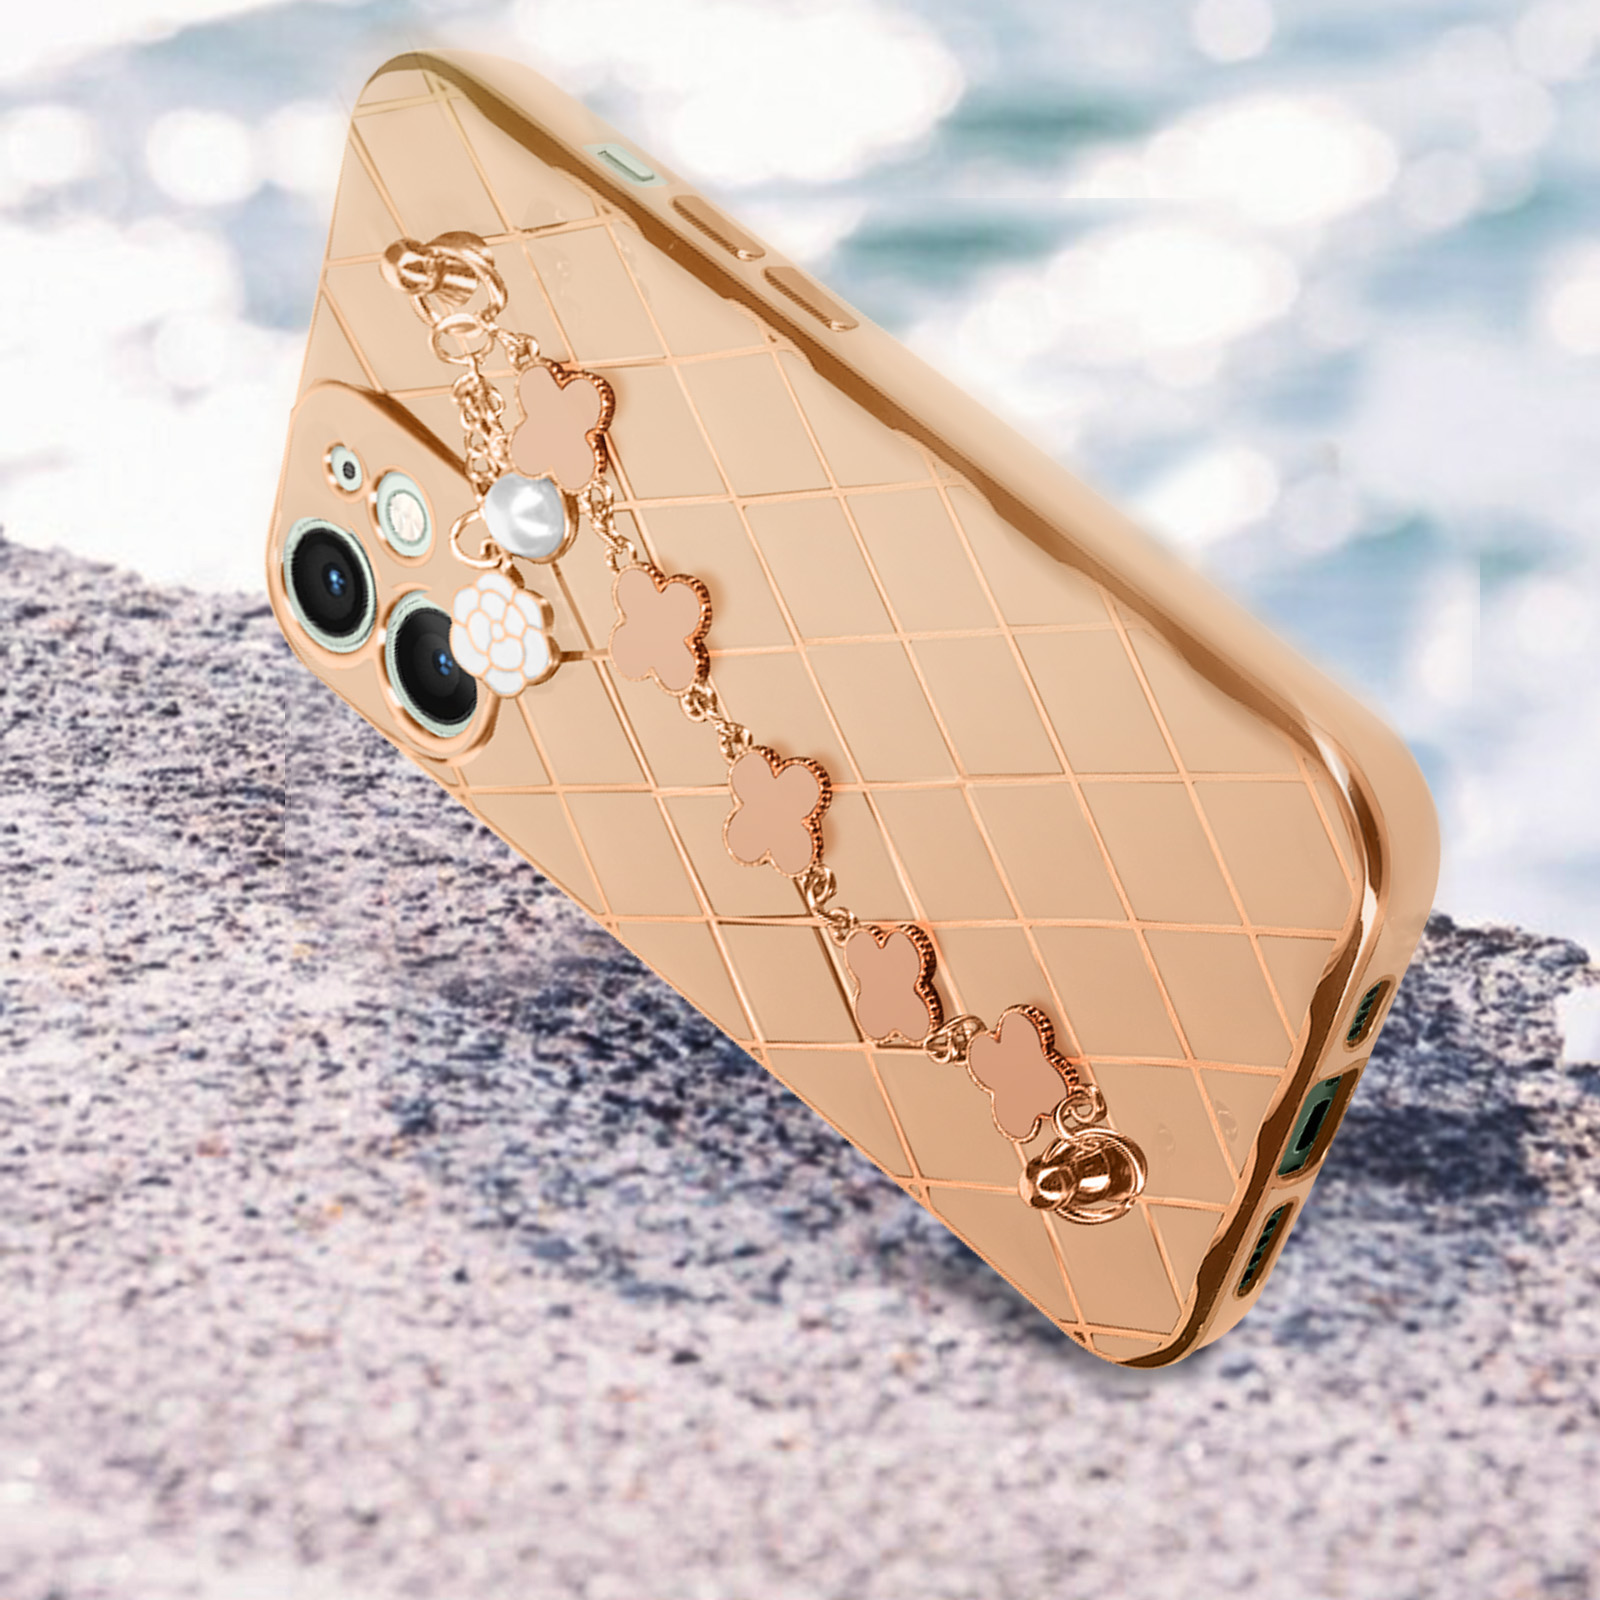 AVIZAR Trend Series, iPhone 12, Backcover, Apple, Rosegold